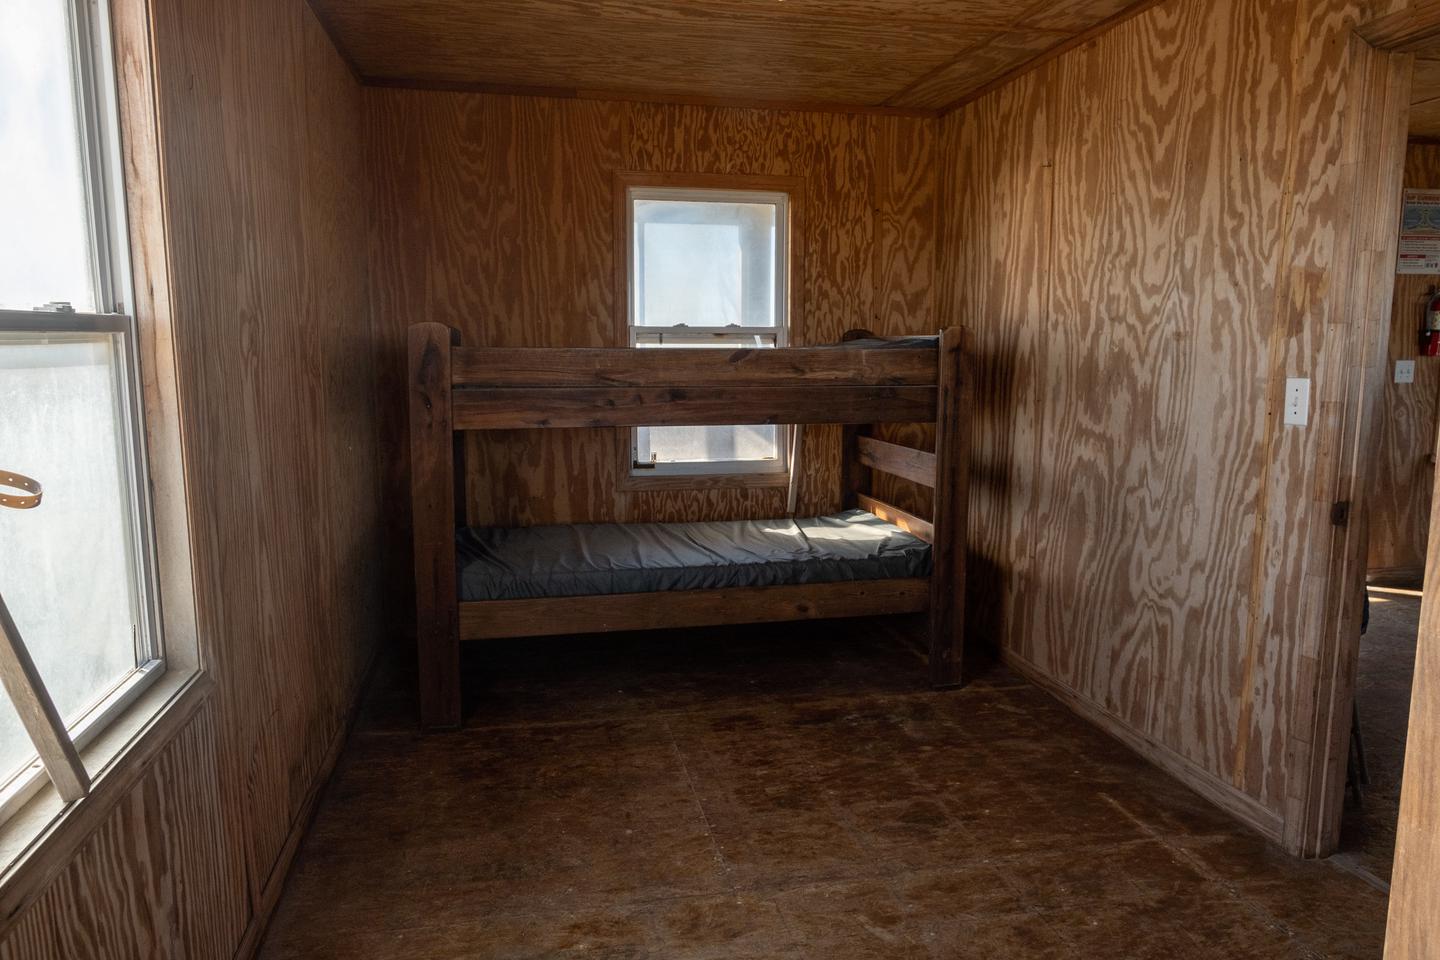 Another view of the bedroom with an additional bunk bed against the wall.Bedroom area.